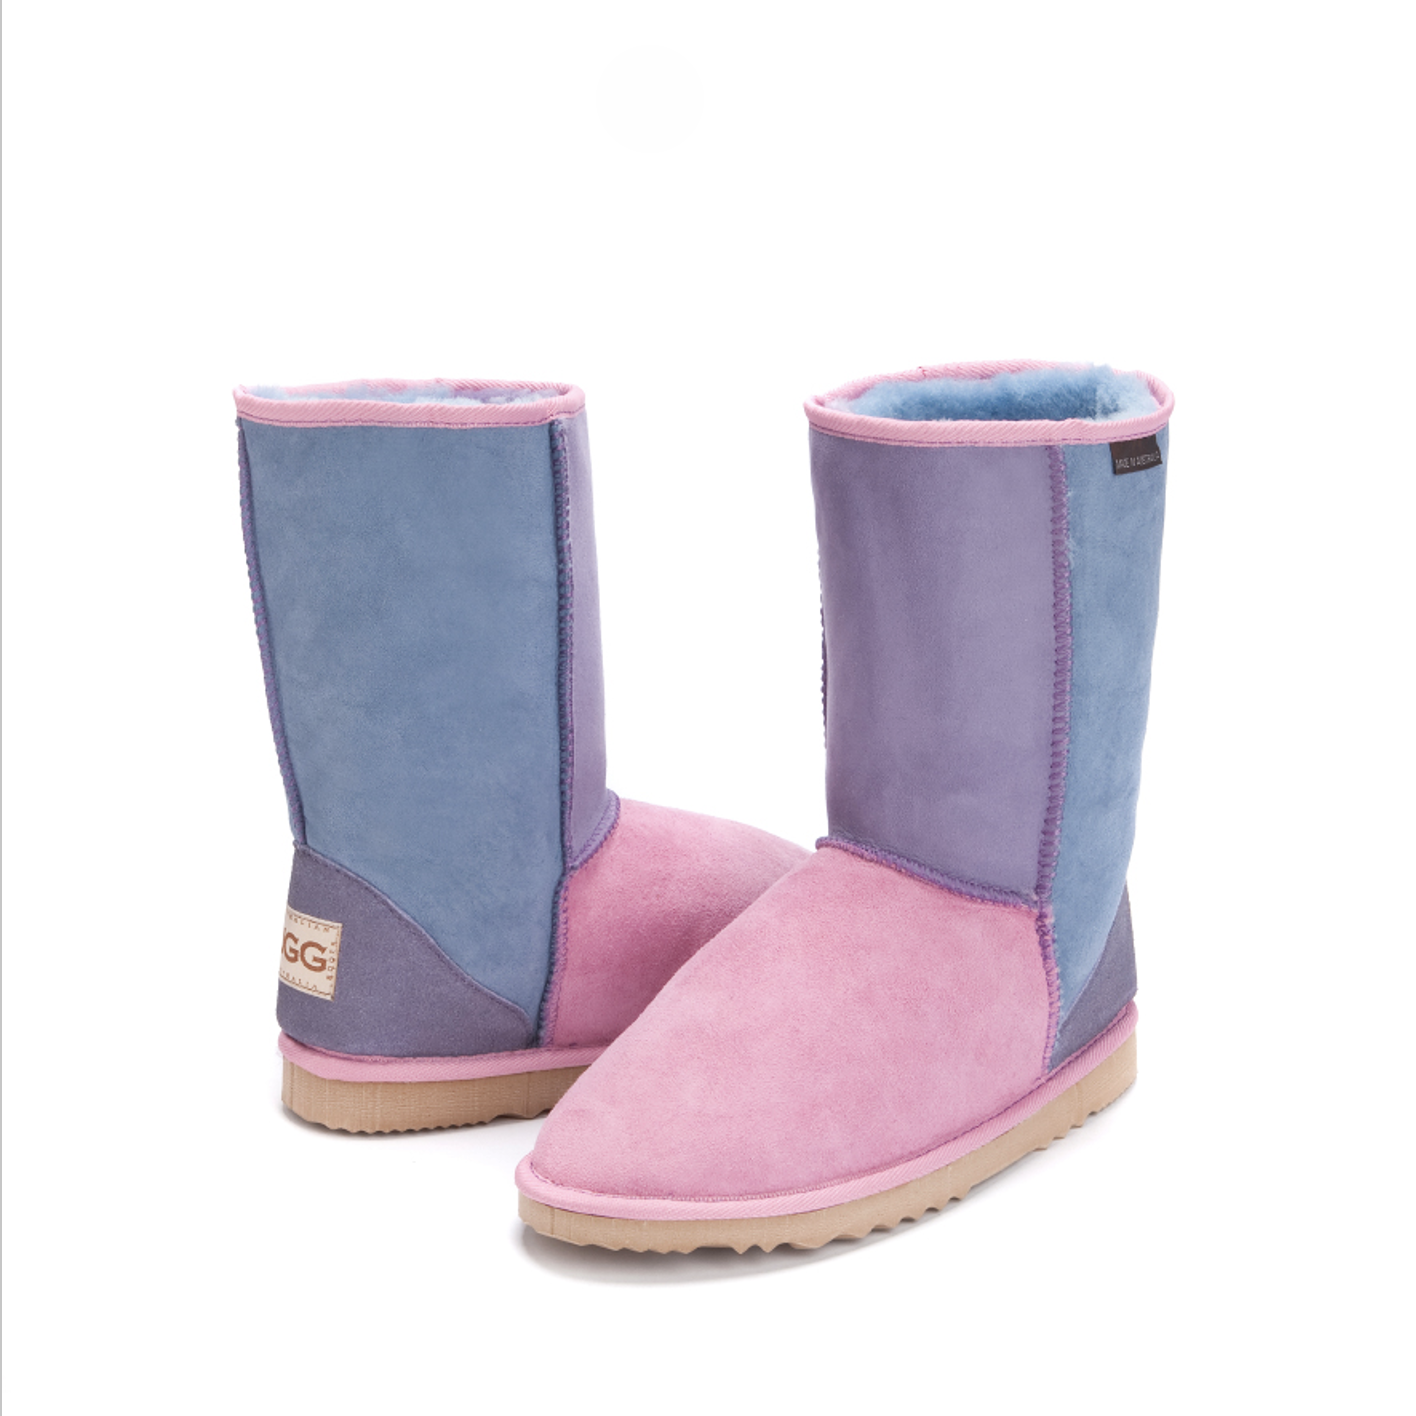 Kid's Harmony Boots in Rainbow patch, boots with sections in pink, lilac and denim blue